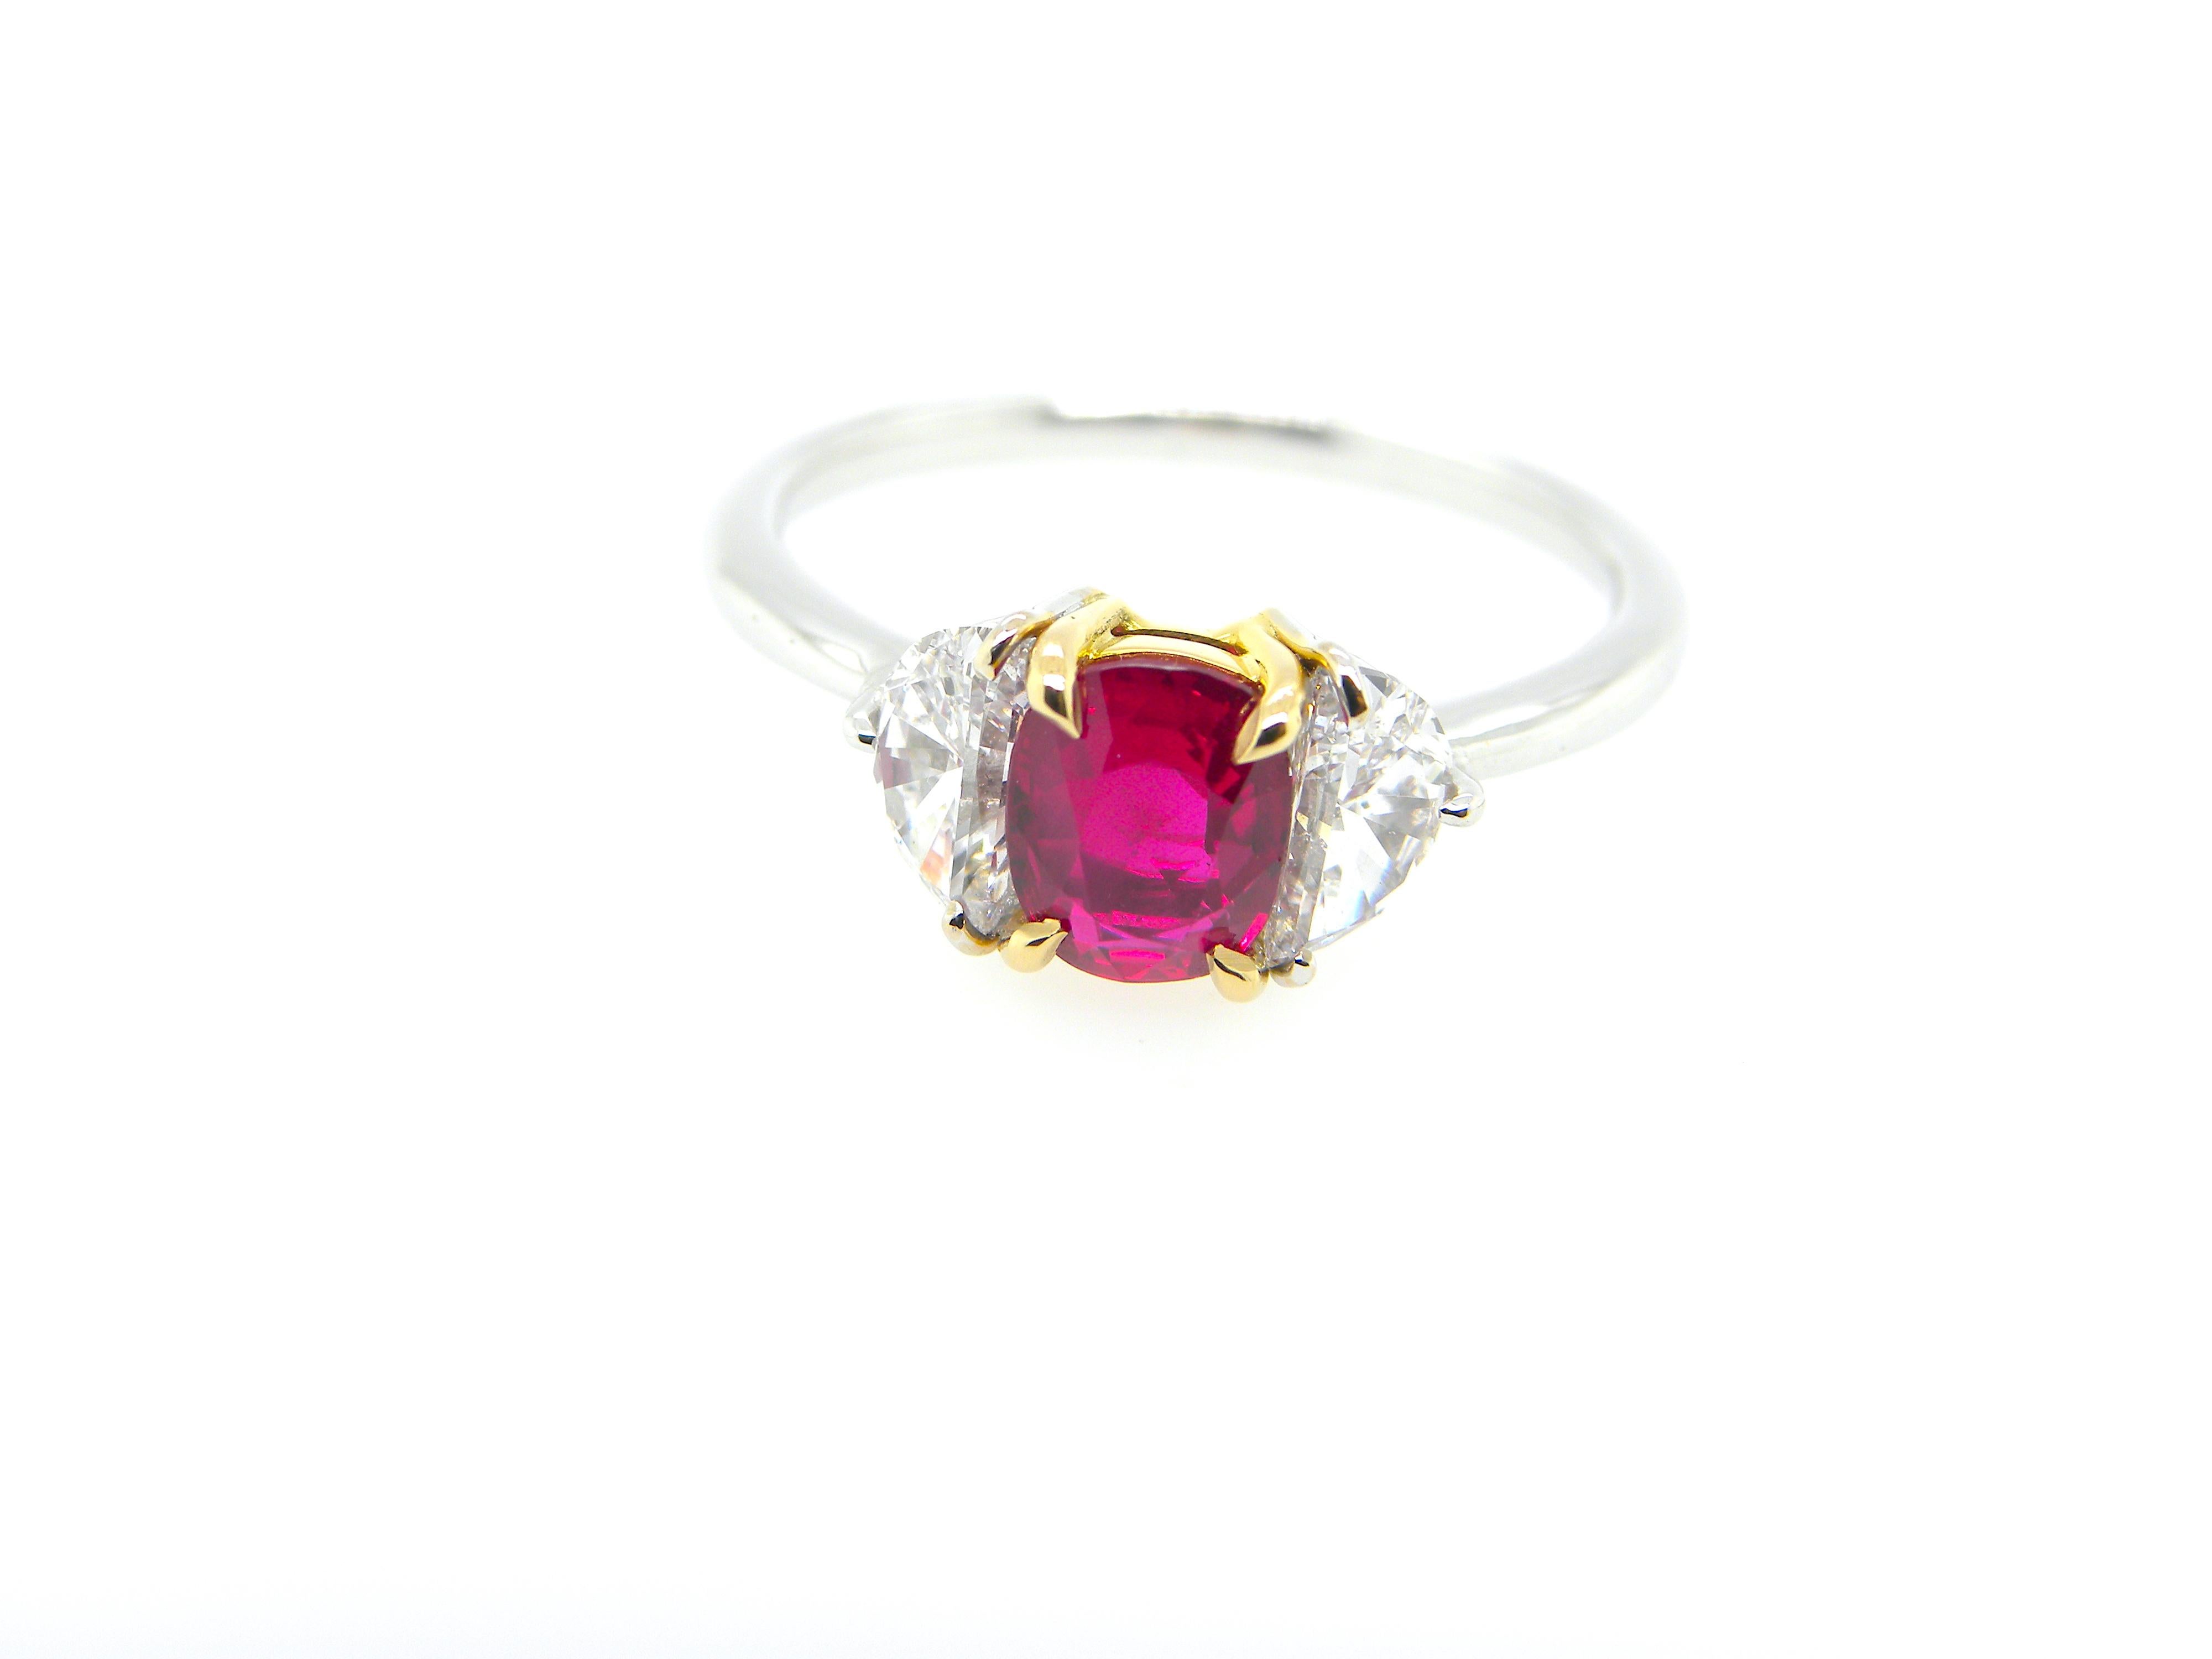 Neoclassical 1.18 Carat GIA Certified Burma No Heat Pigeon's Blood Red Ruby and Diamond Ring